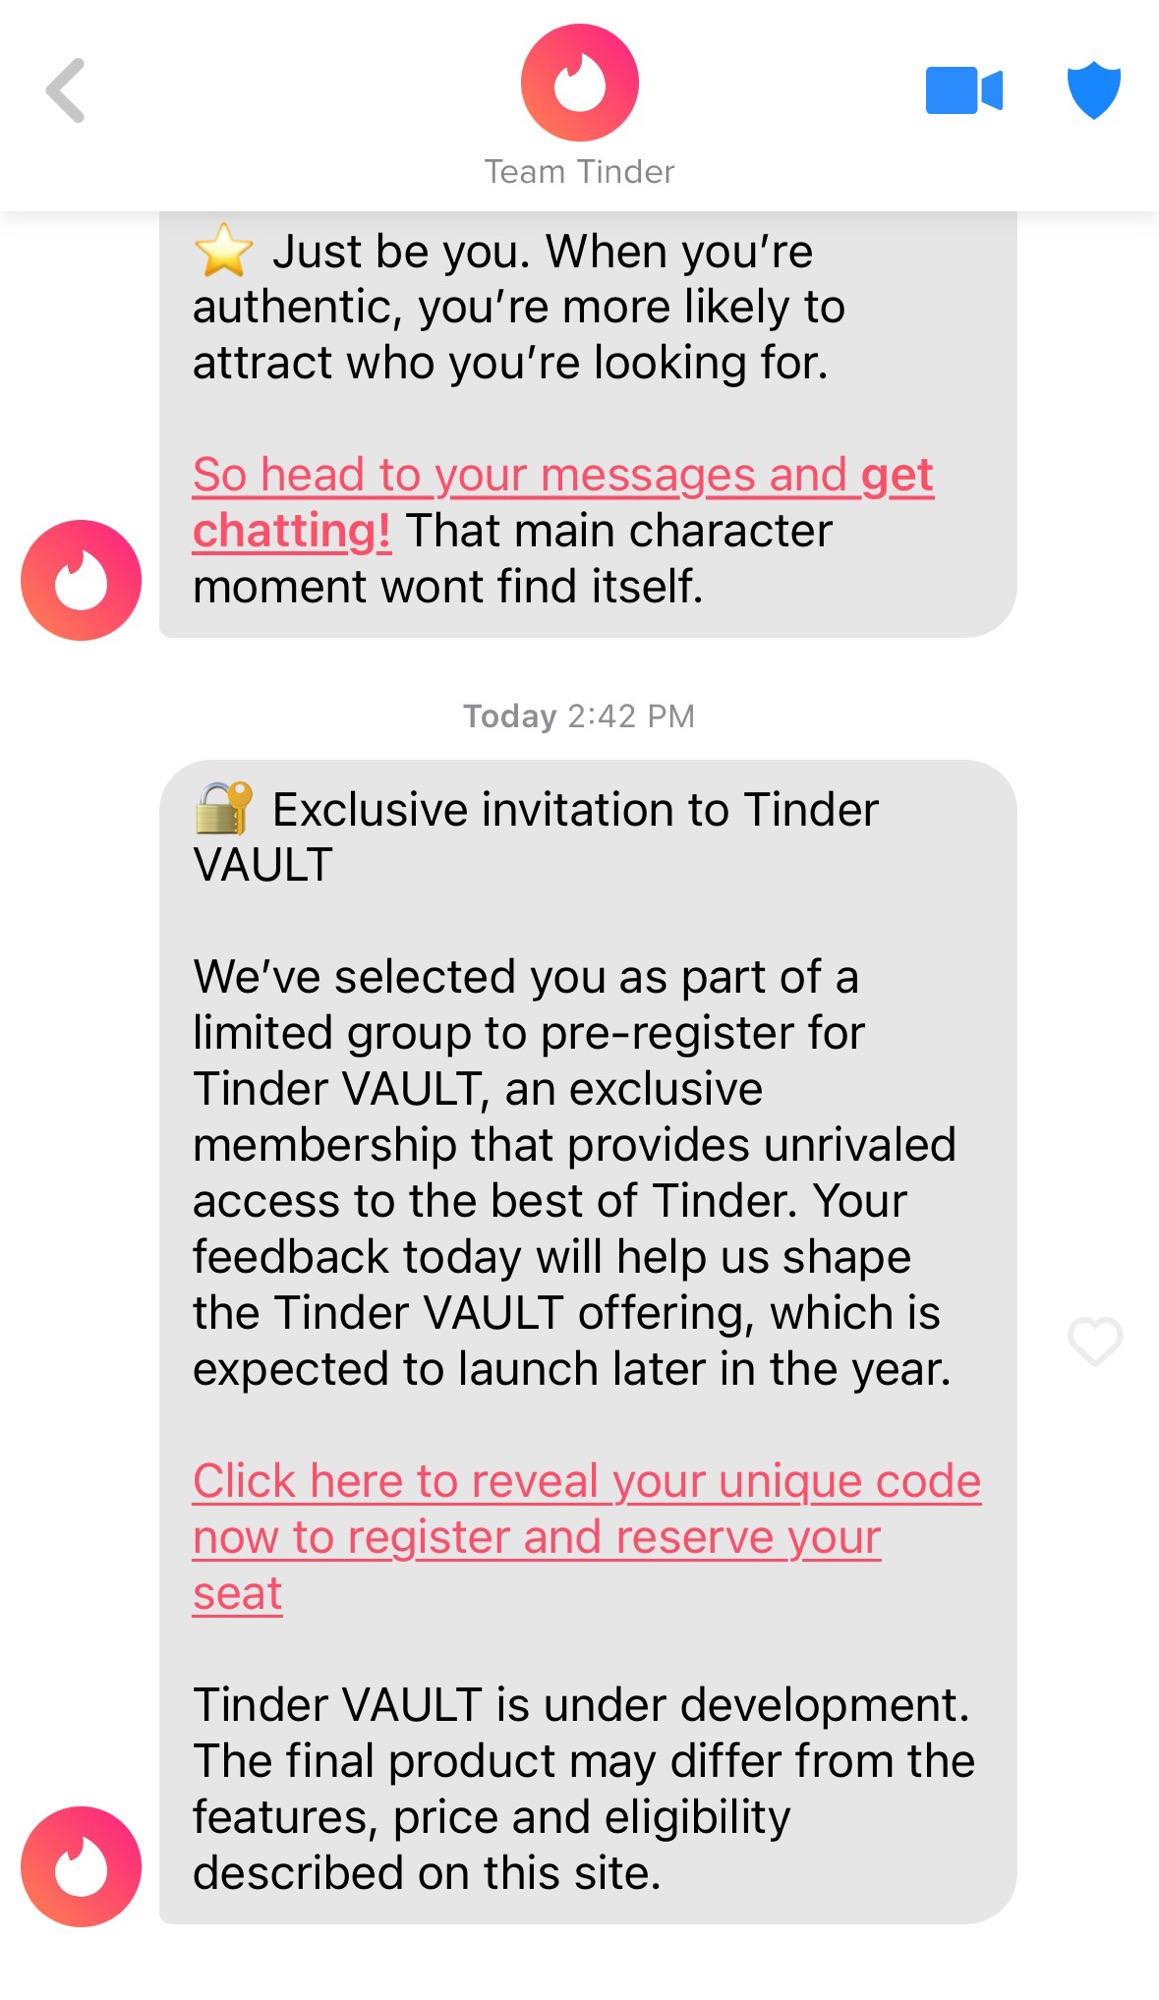 Pay $500 for Tinder Vault and swipe right for the elite